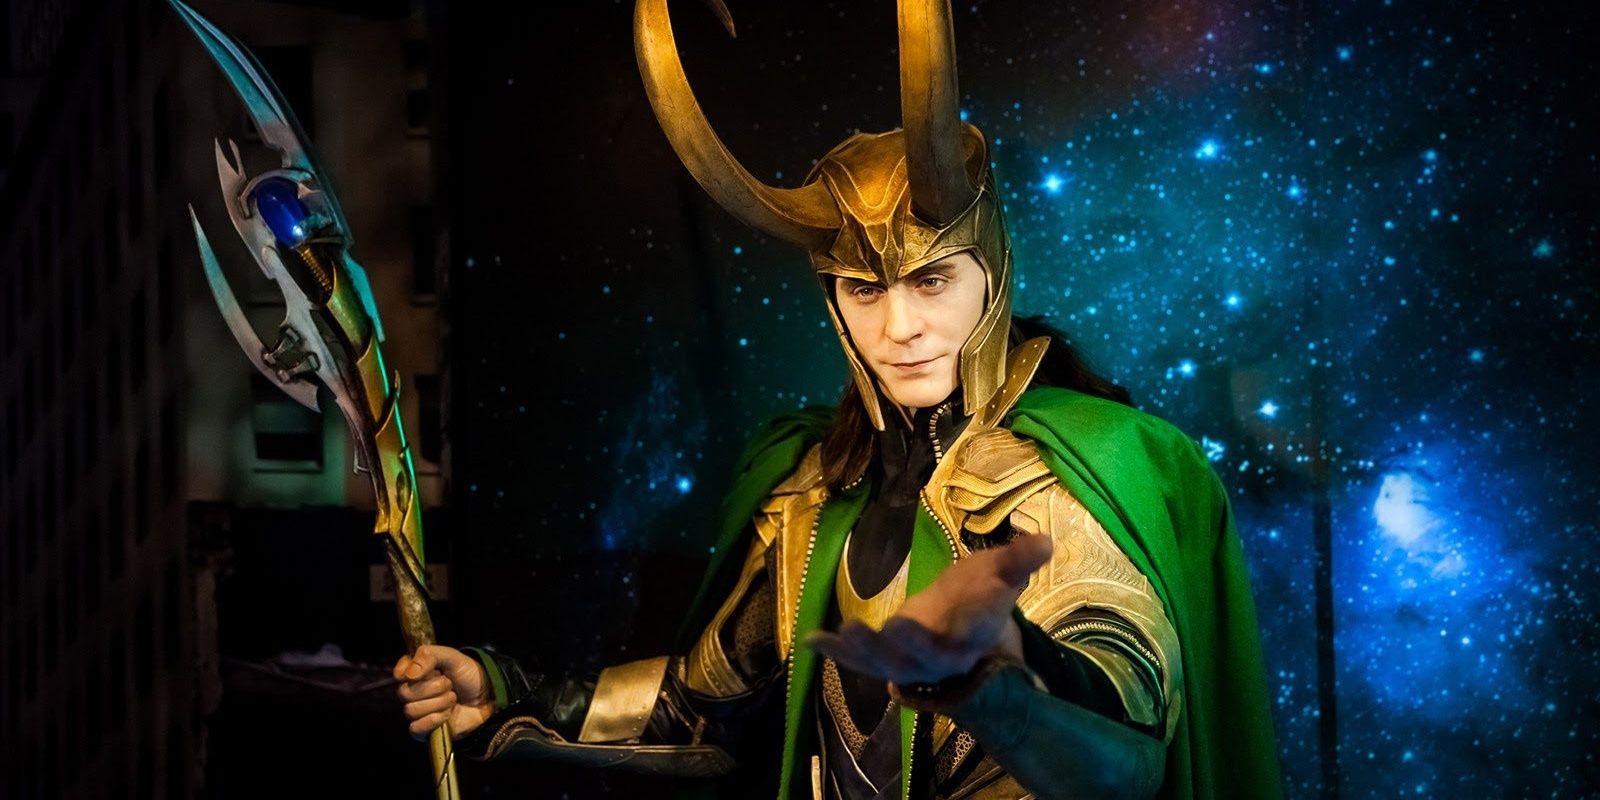 Loki from an exhibit in Norway